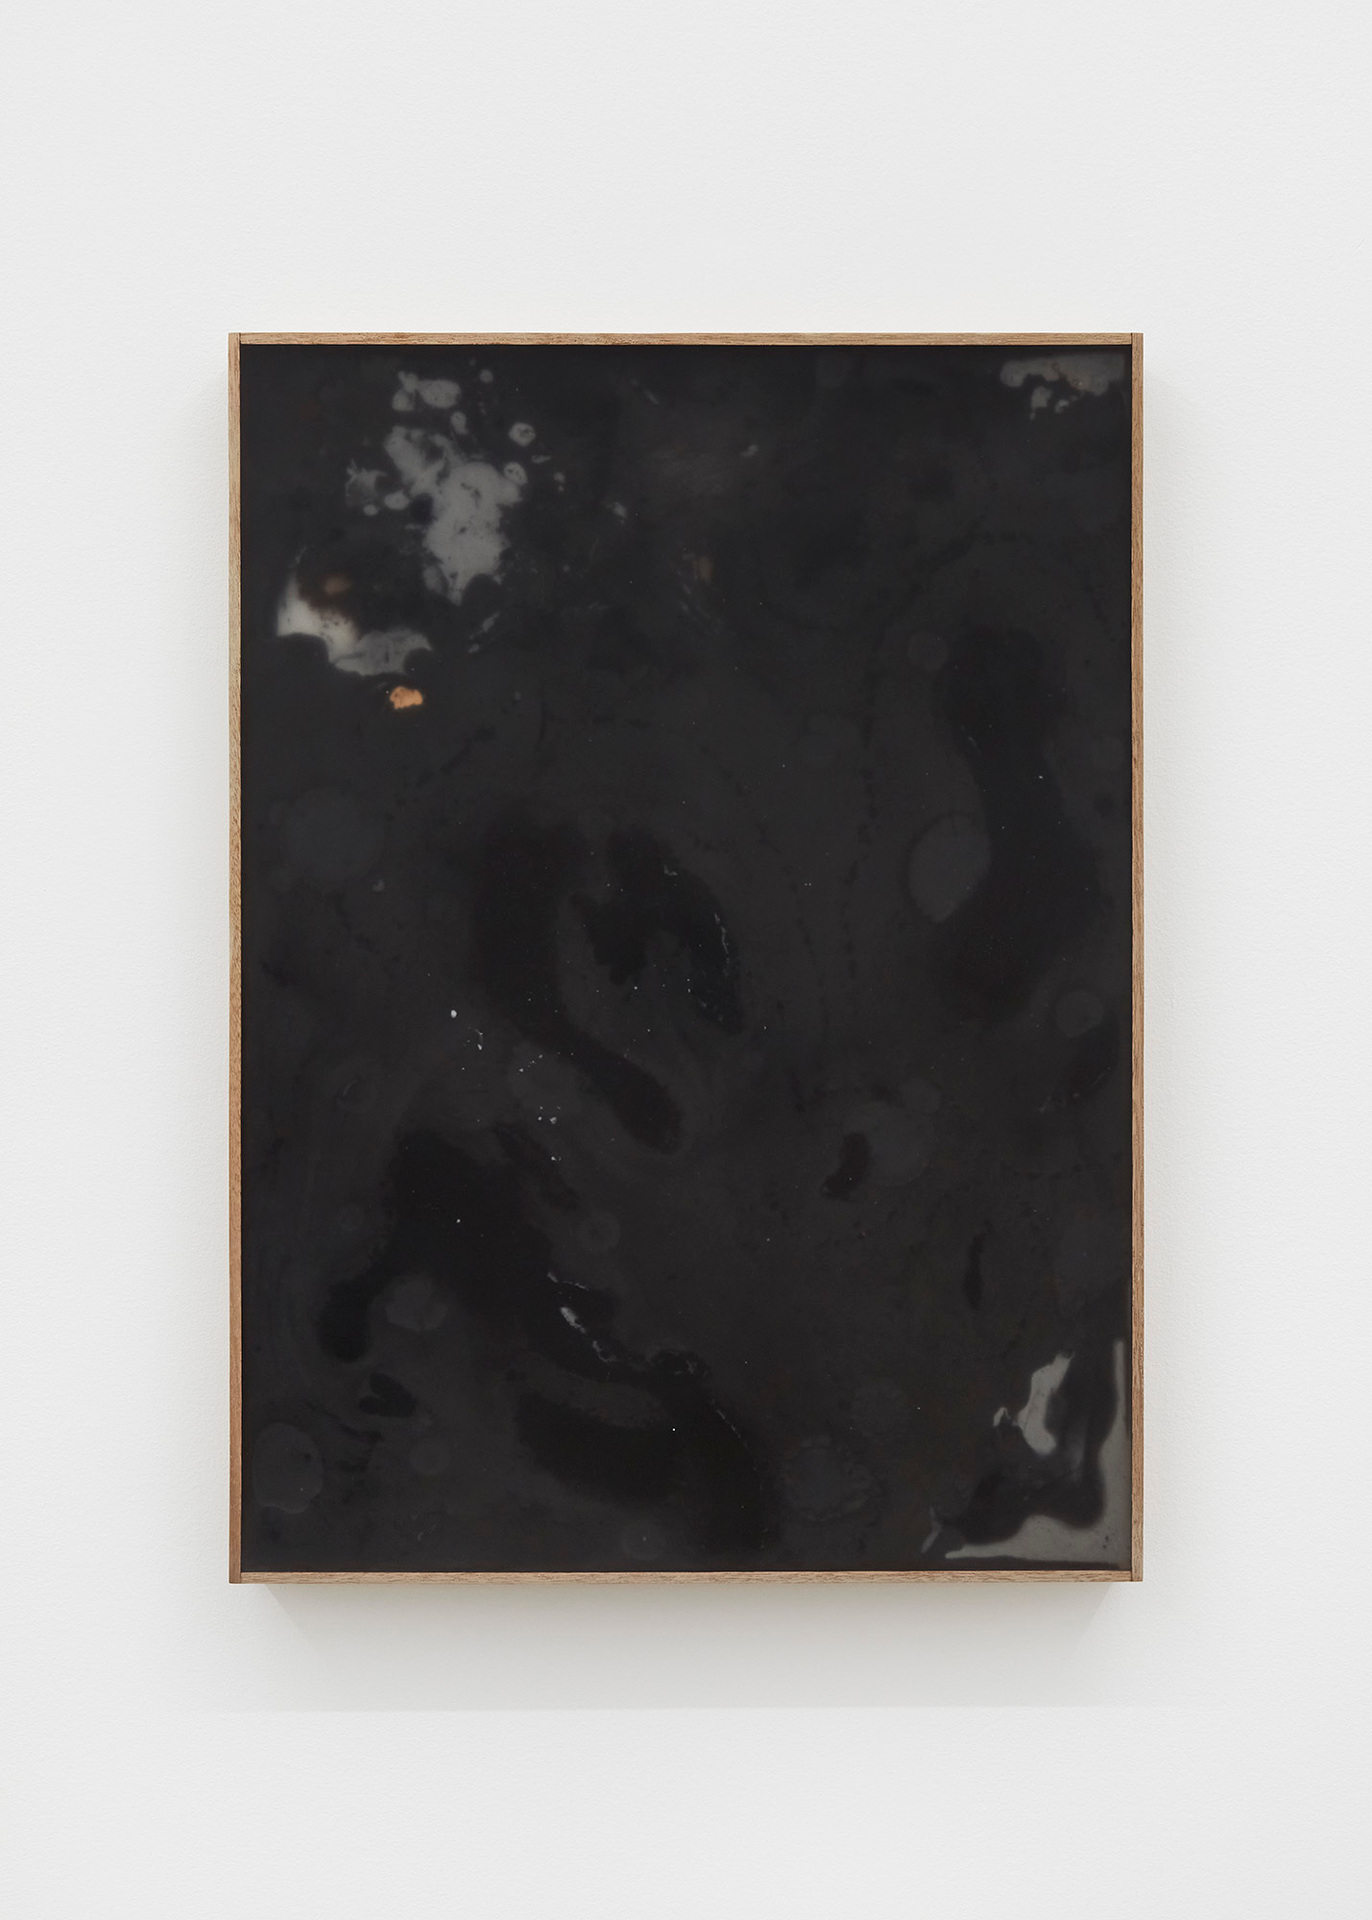 Claire Baily, How will you remember me, 2022, Epoxy resin, graphite, dolomite, wax, ink, earth pigments, meranti, plywood, 80 x 58.5 x 4.5 cm